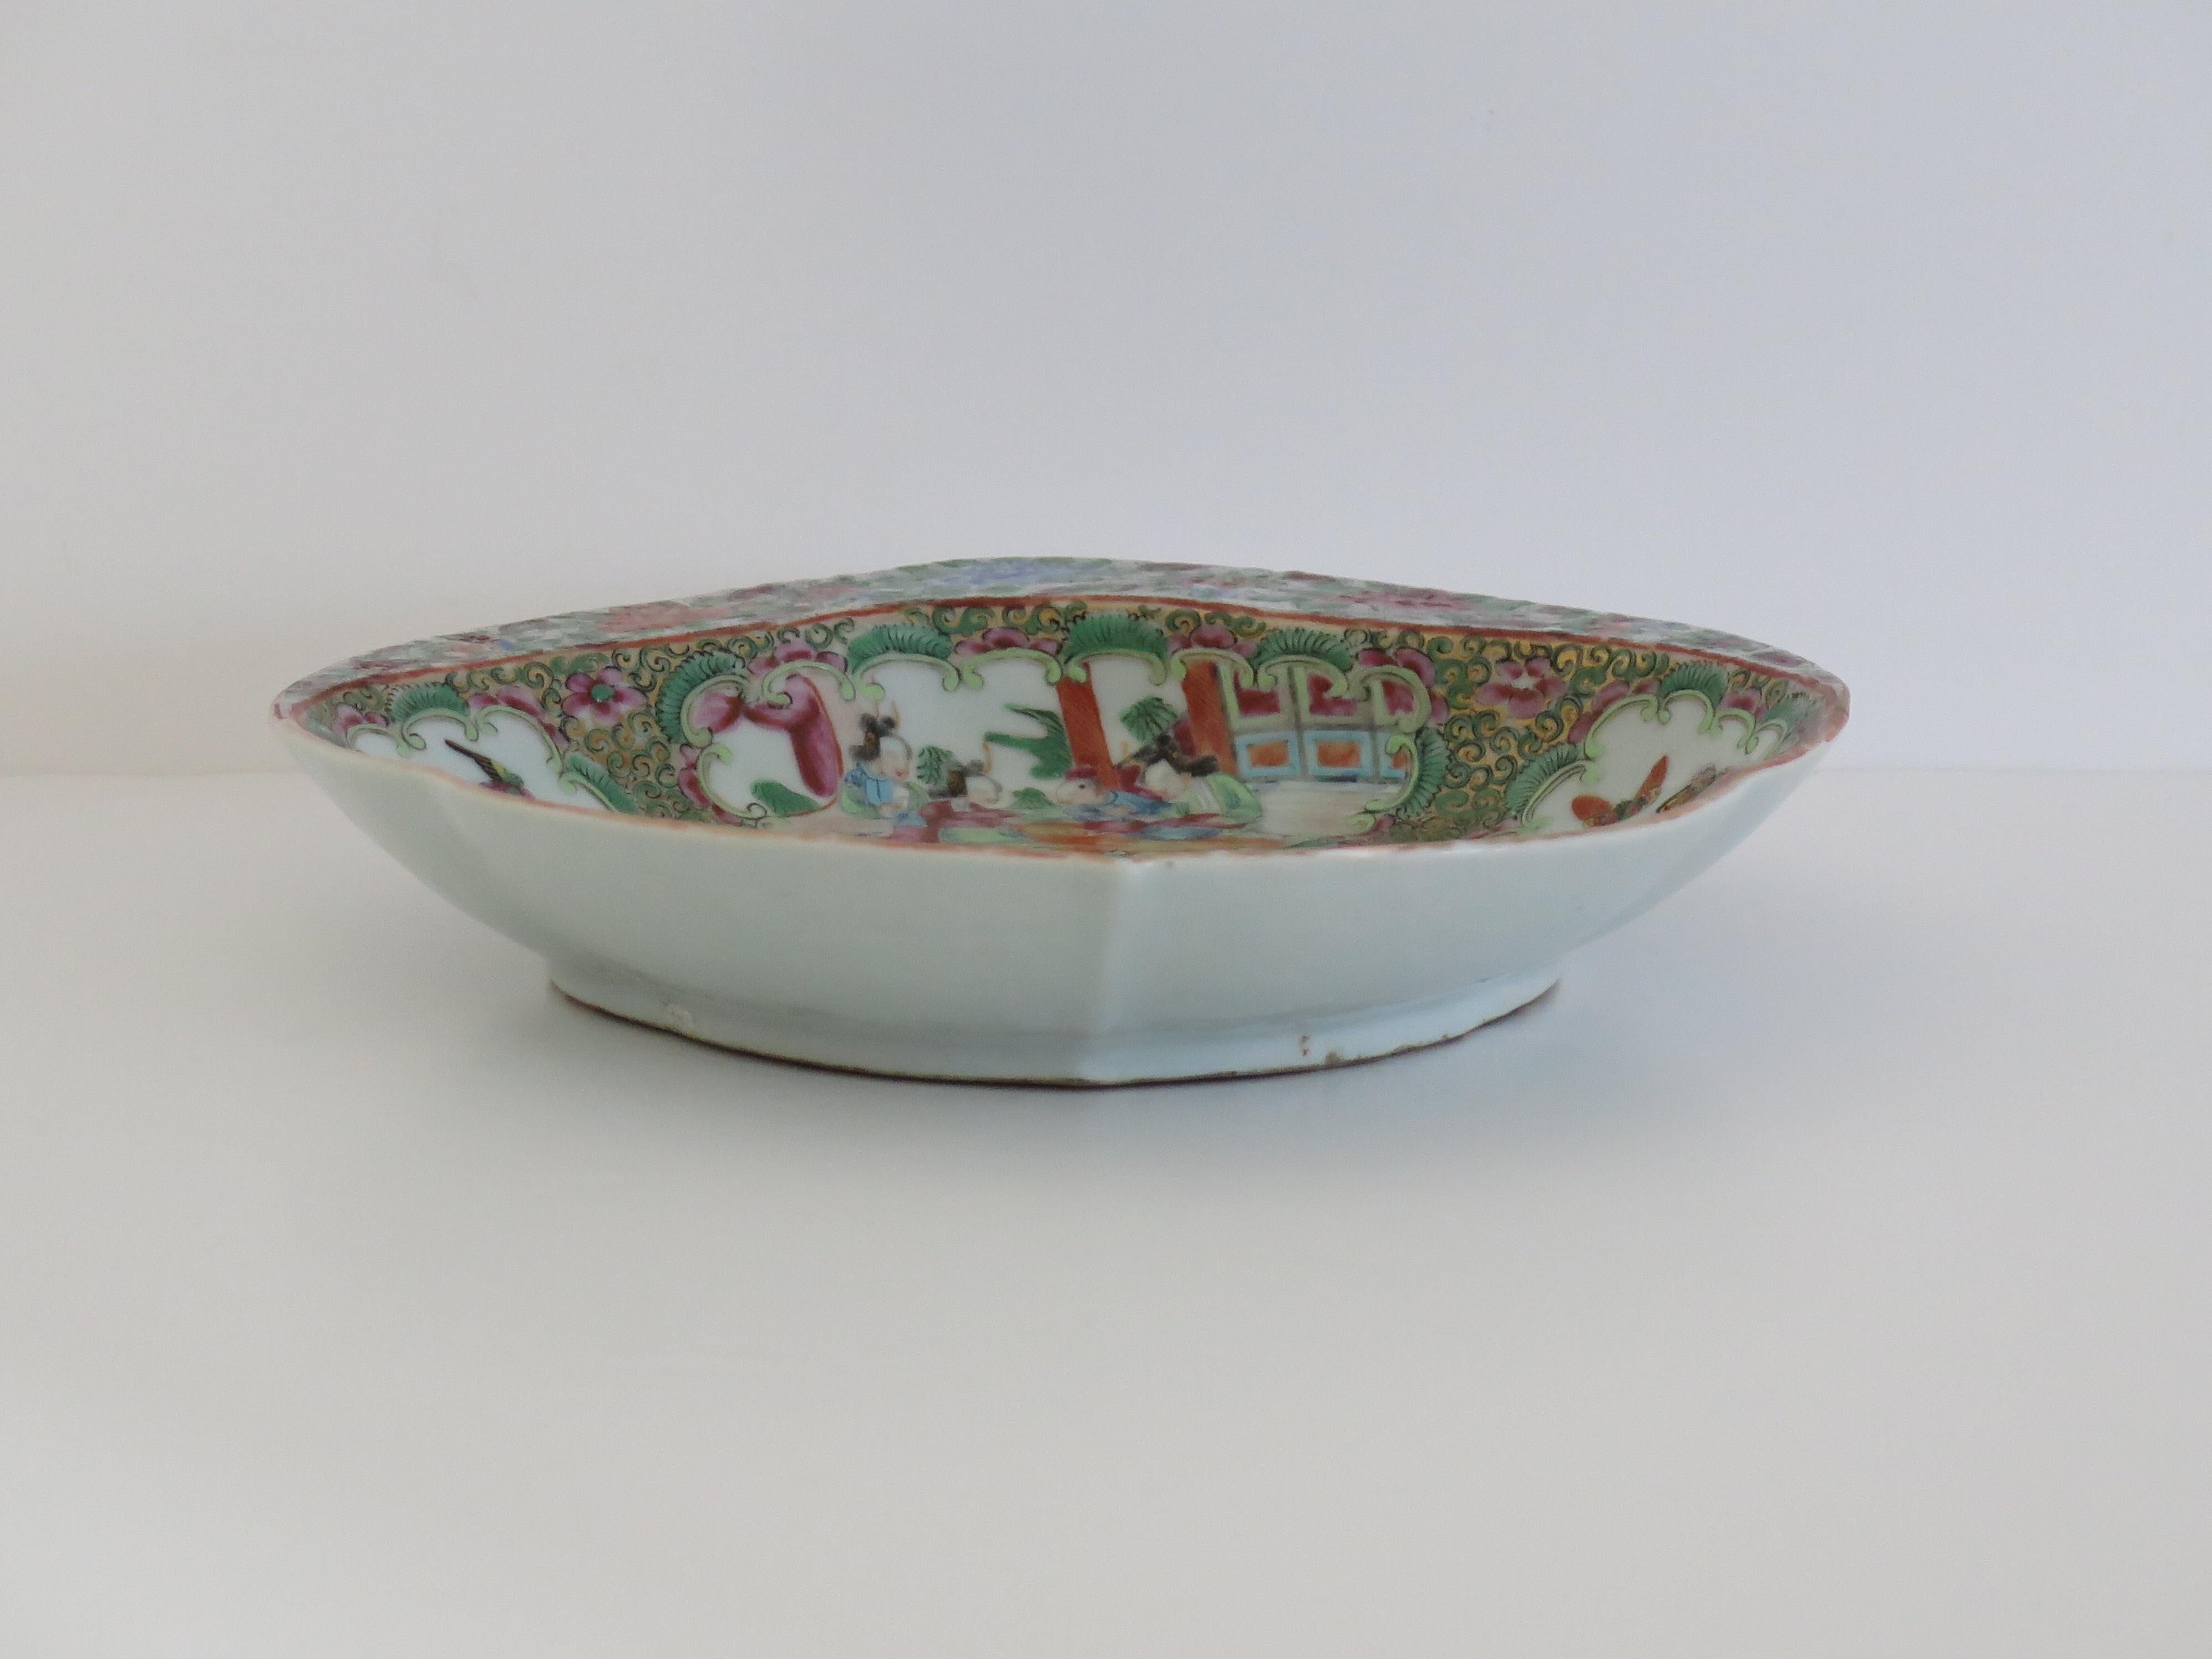 Hand-Painted Chinese Export Porcelain Serving or Shrimp Dish Rose Medallion, Qing Ca 1810